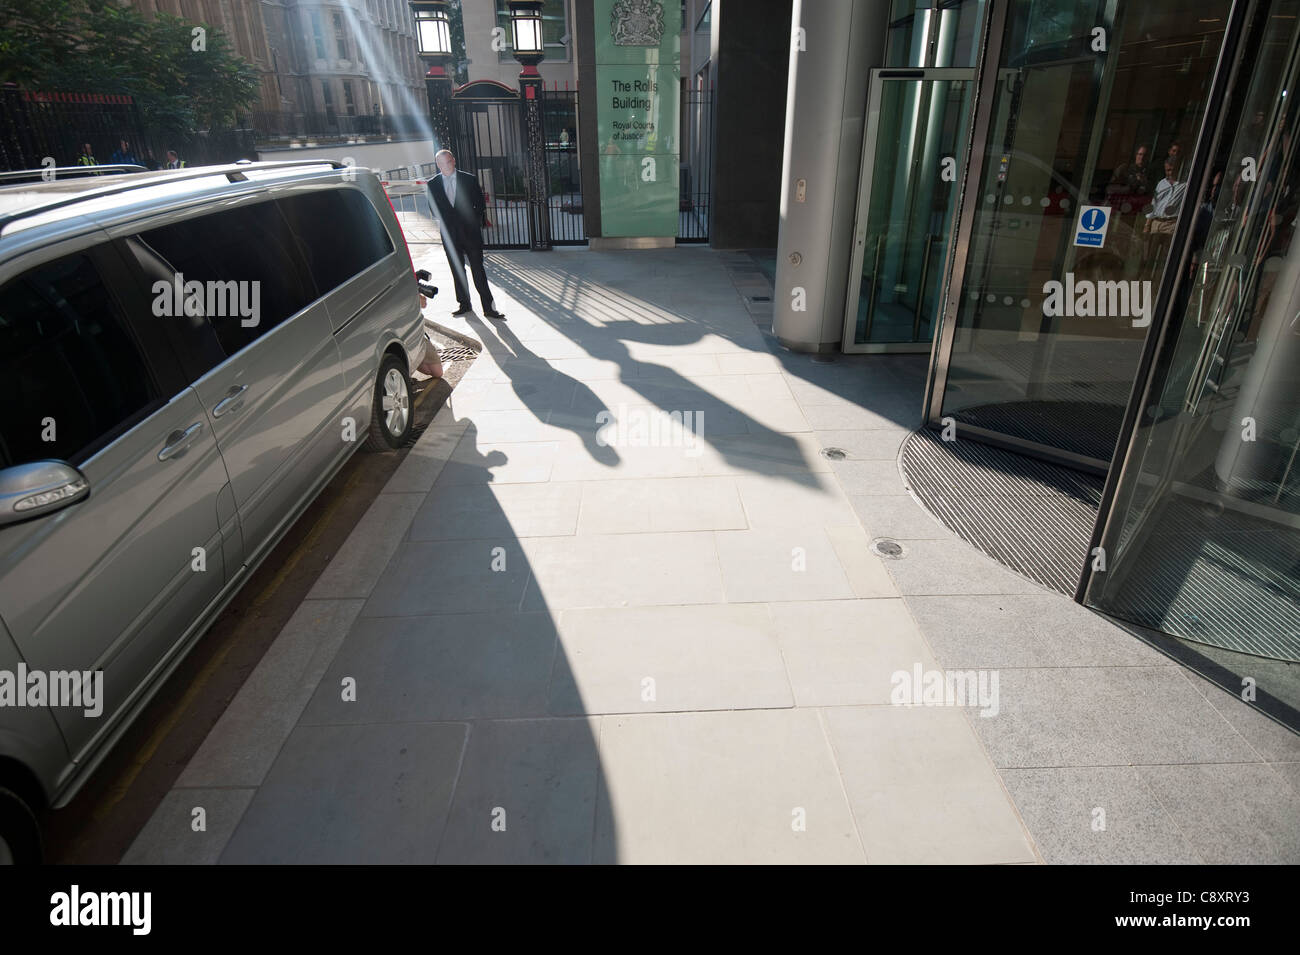 Man shadow - security bodyguard outside Rolls Building London Roman Abramovich security man waits for him to leave Stock Photo